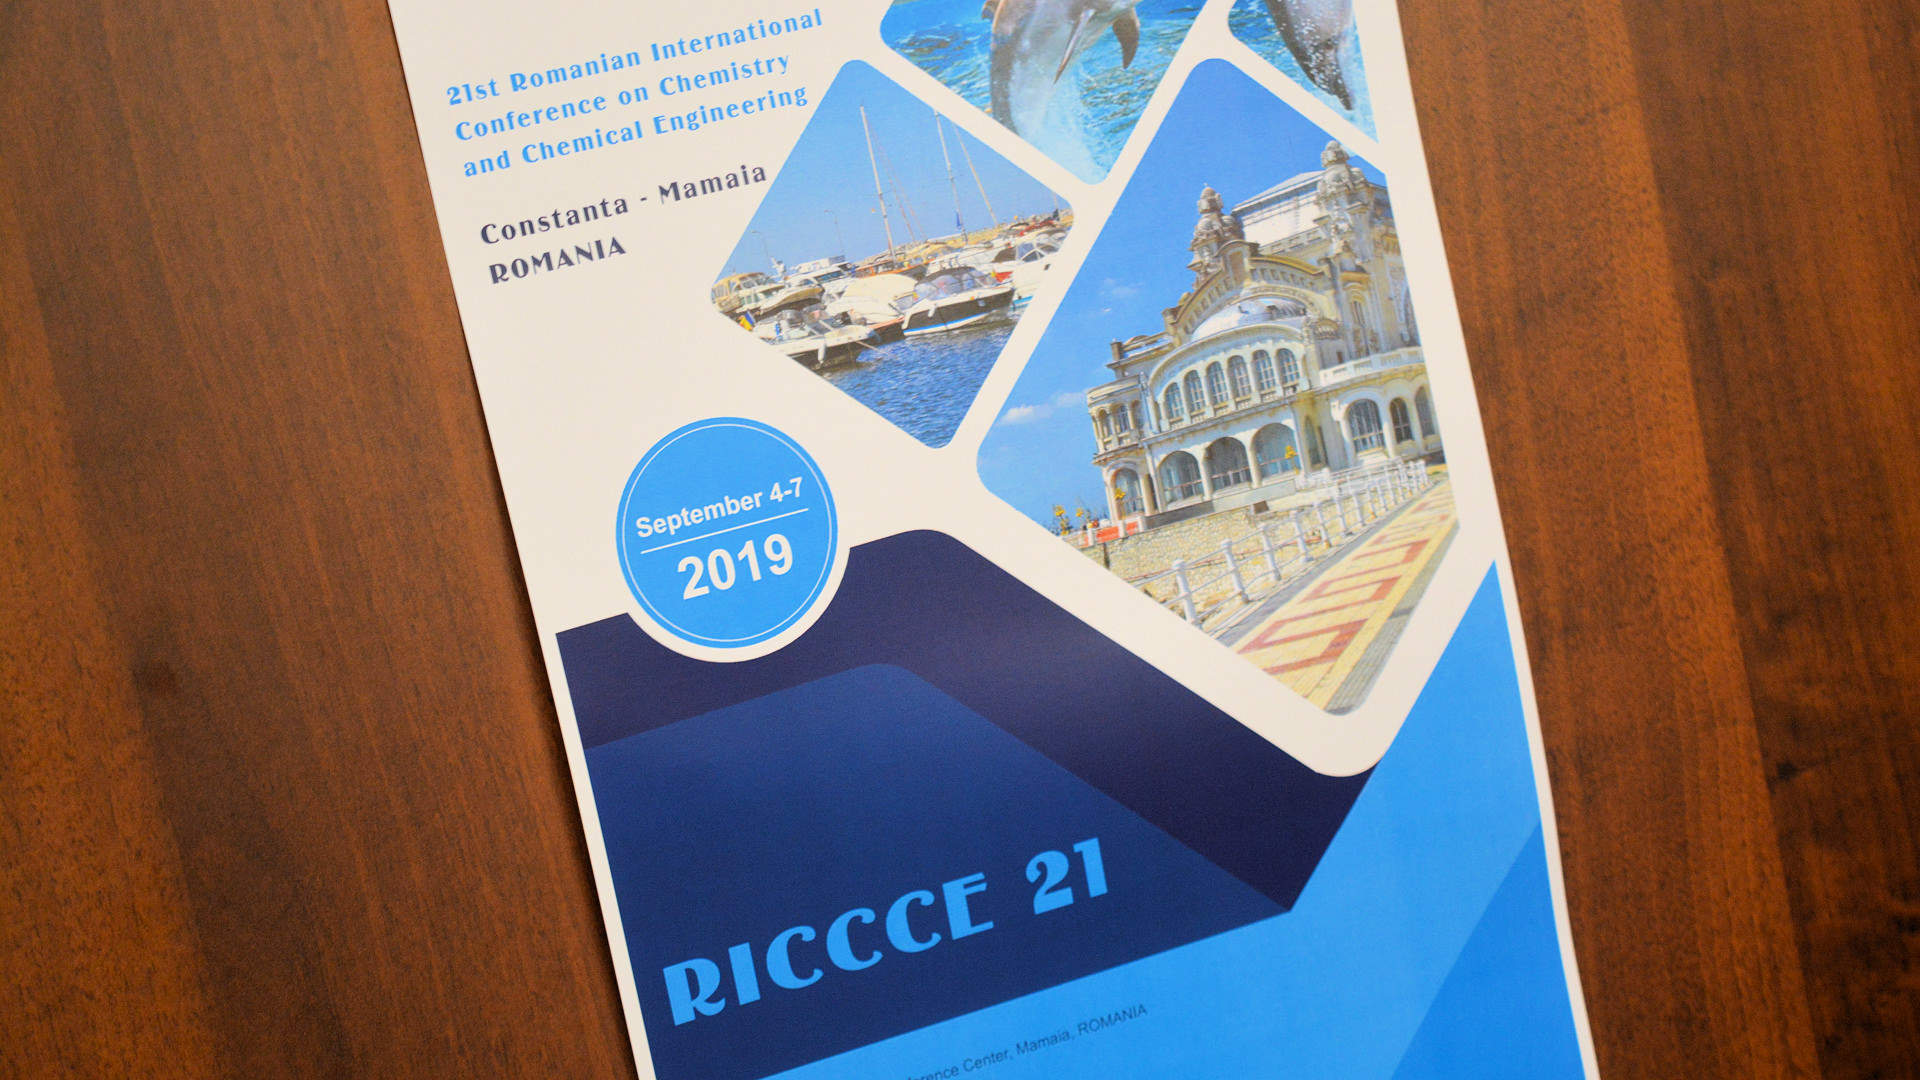 The 21st Romanian International Conference on Chemistry and Chemical Engineering (RICCCE)